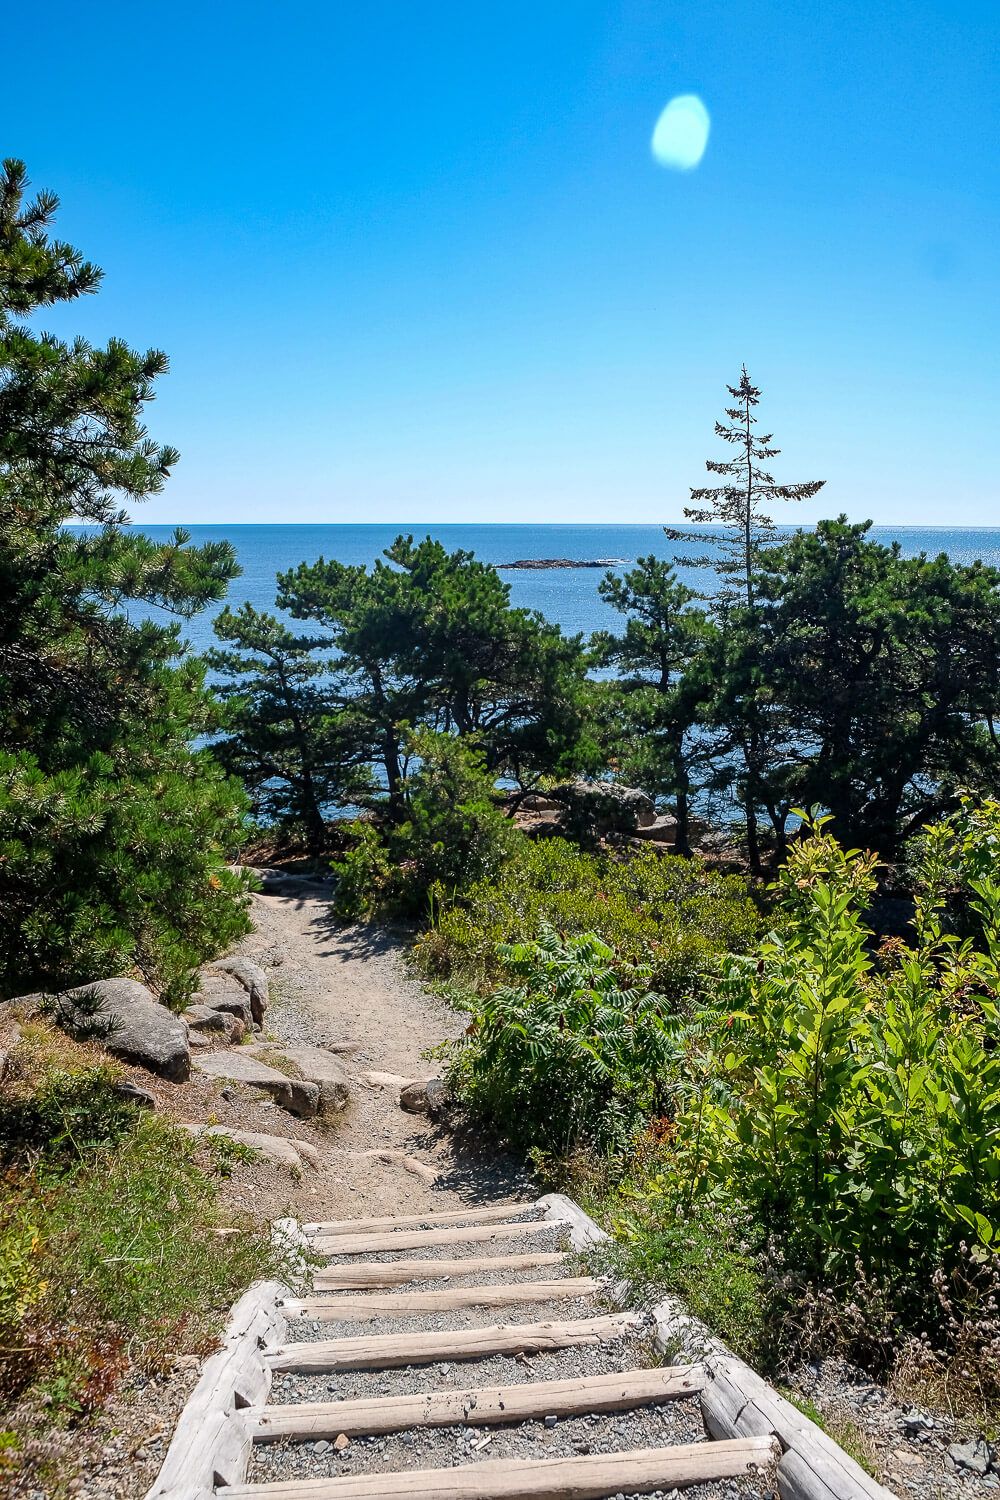 Ocean Path: One day in acadia national park